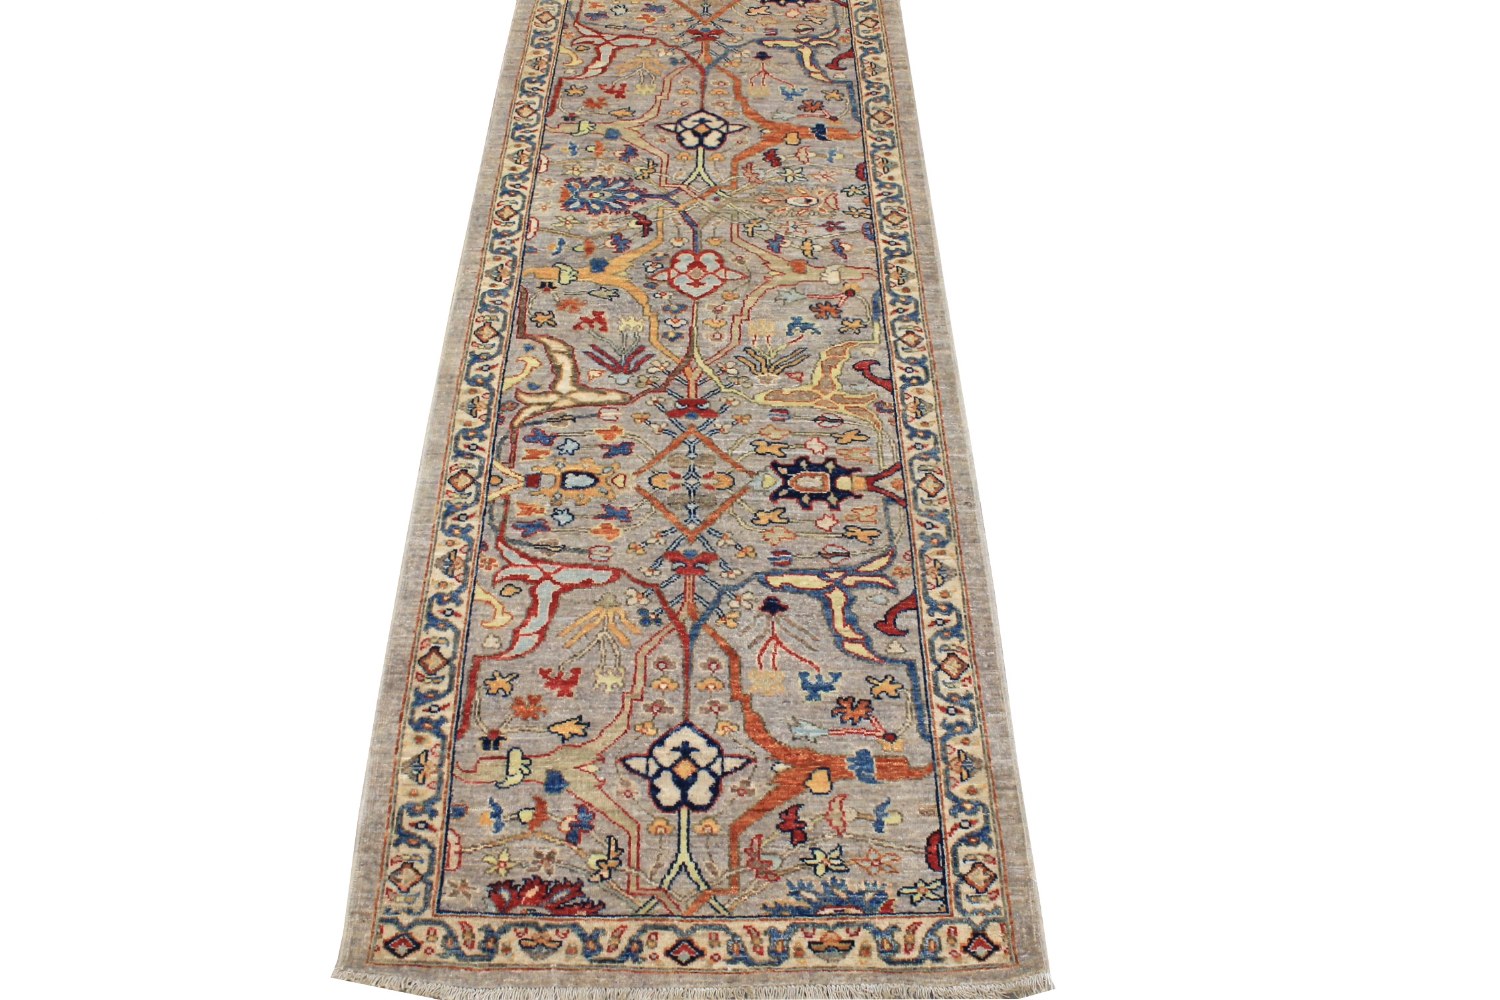 8 ft. Runner Aryana & Antique Revivals Hand Knotted Wool Area Rug - MR028804